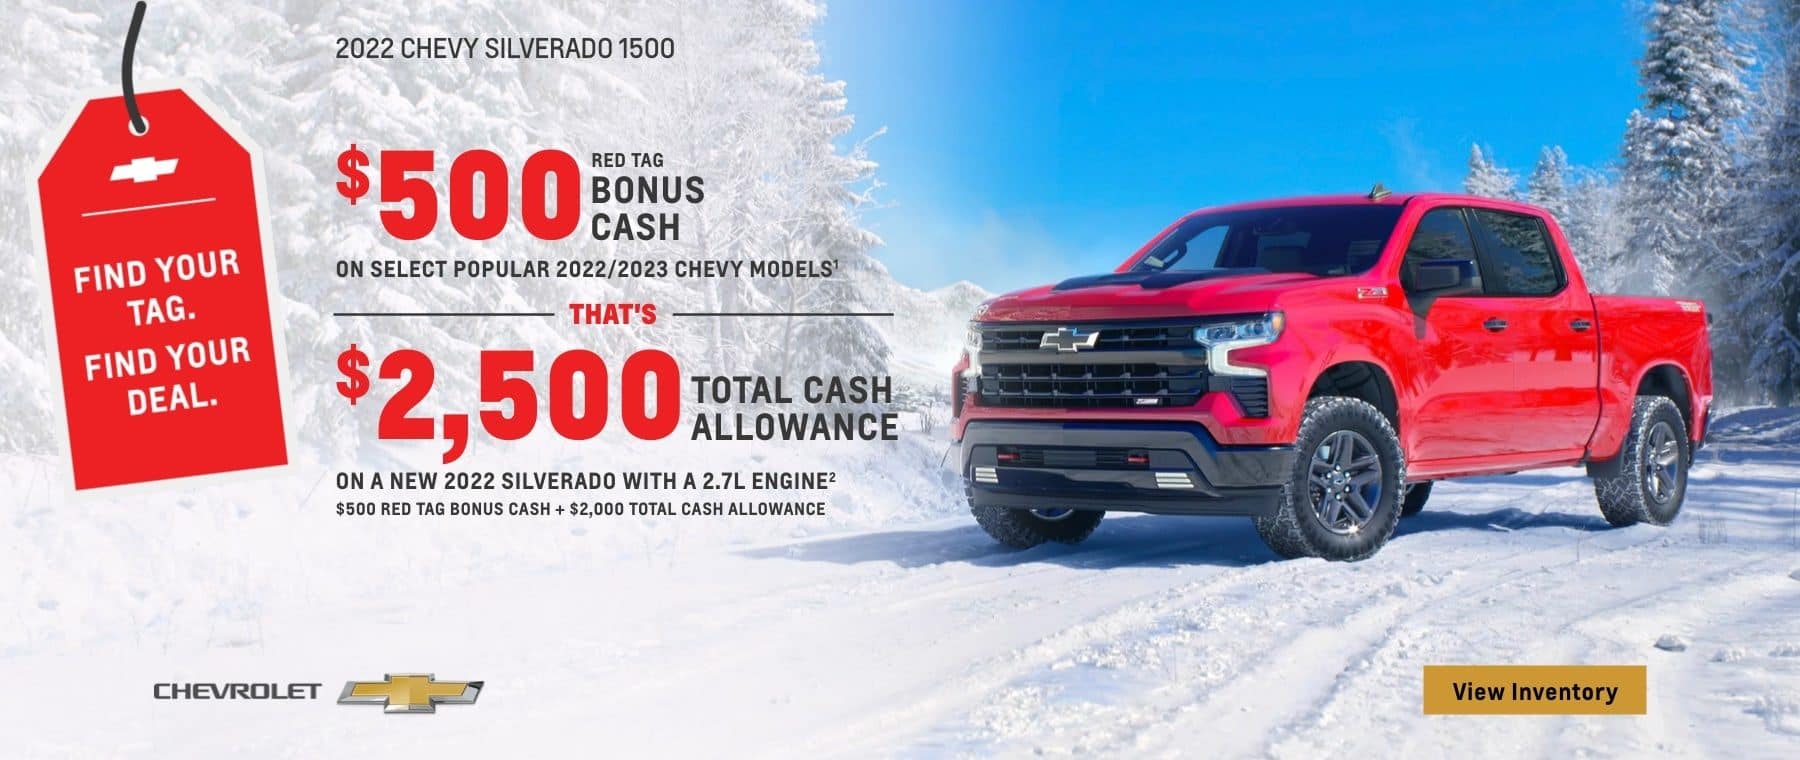 2022 Chevy Silverado 1500. $500 Red Tag Bonus Cash on select popular 2022/2023 Chevy models. That's $2,500 total cash allowance on a new 2022 Silverado with a 2.7L engine. $500 Red Tag Bonus Cash + $2,000 Total Cash Allowance